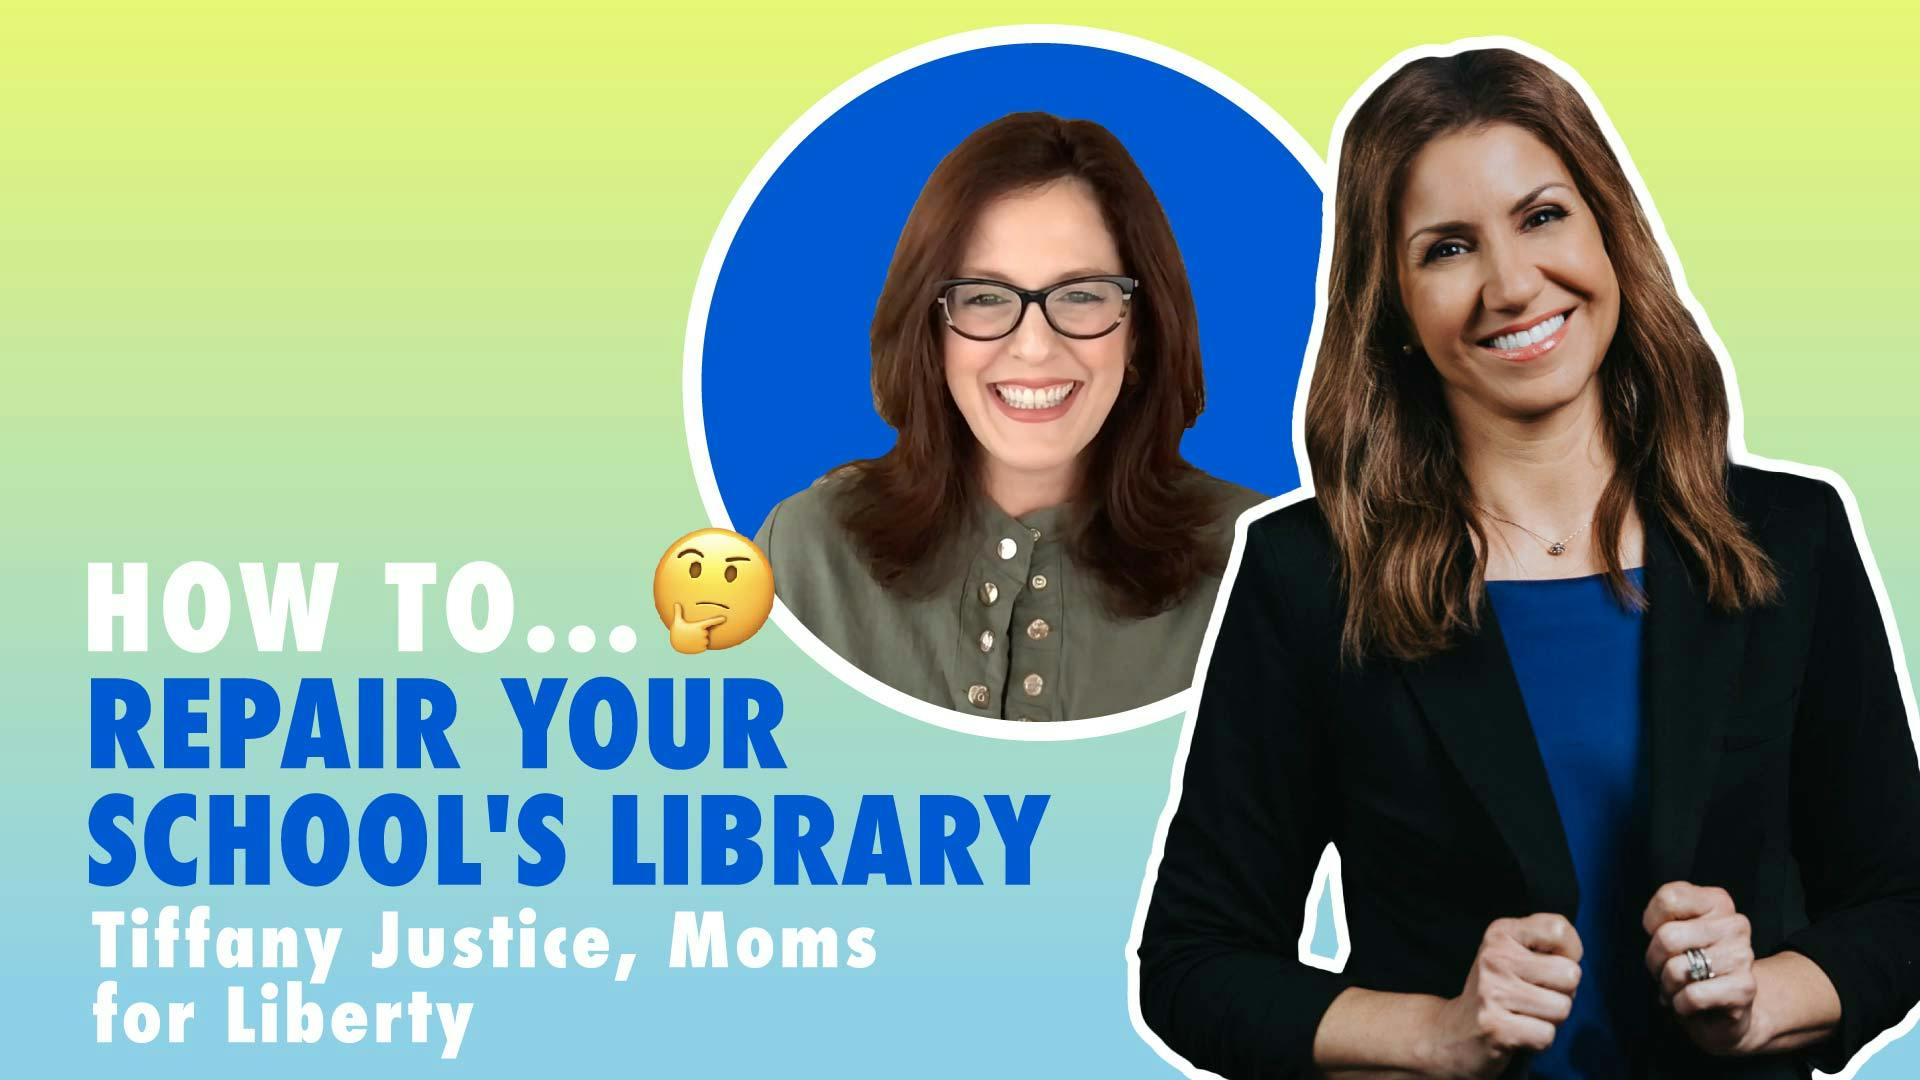 How To Repair Your School's Library with Tiffany Justice